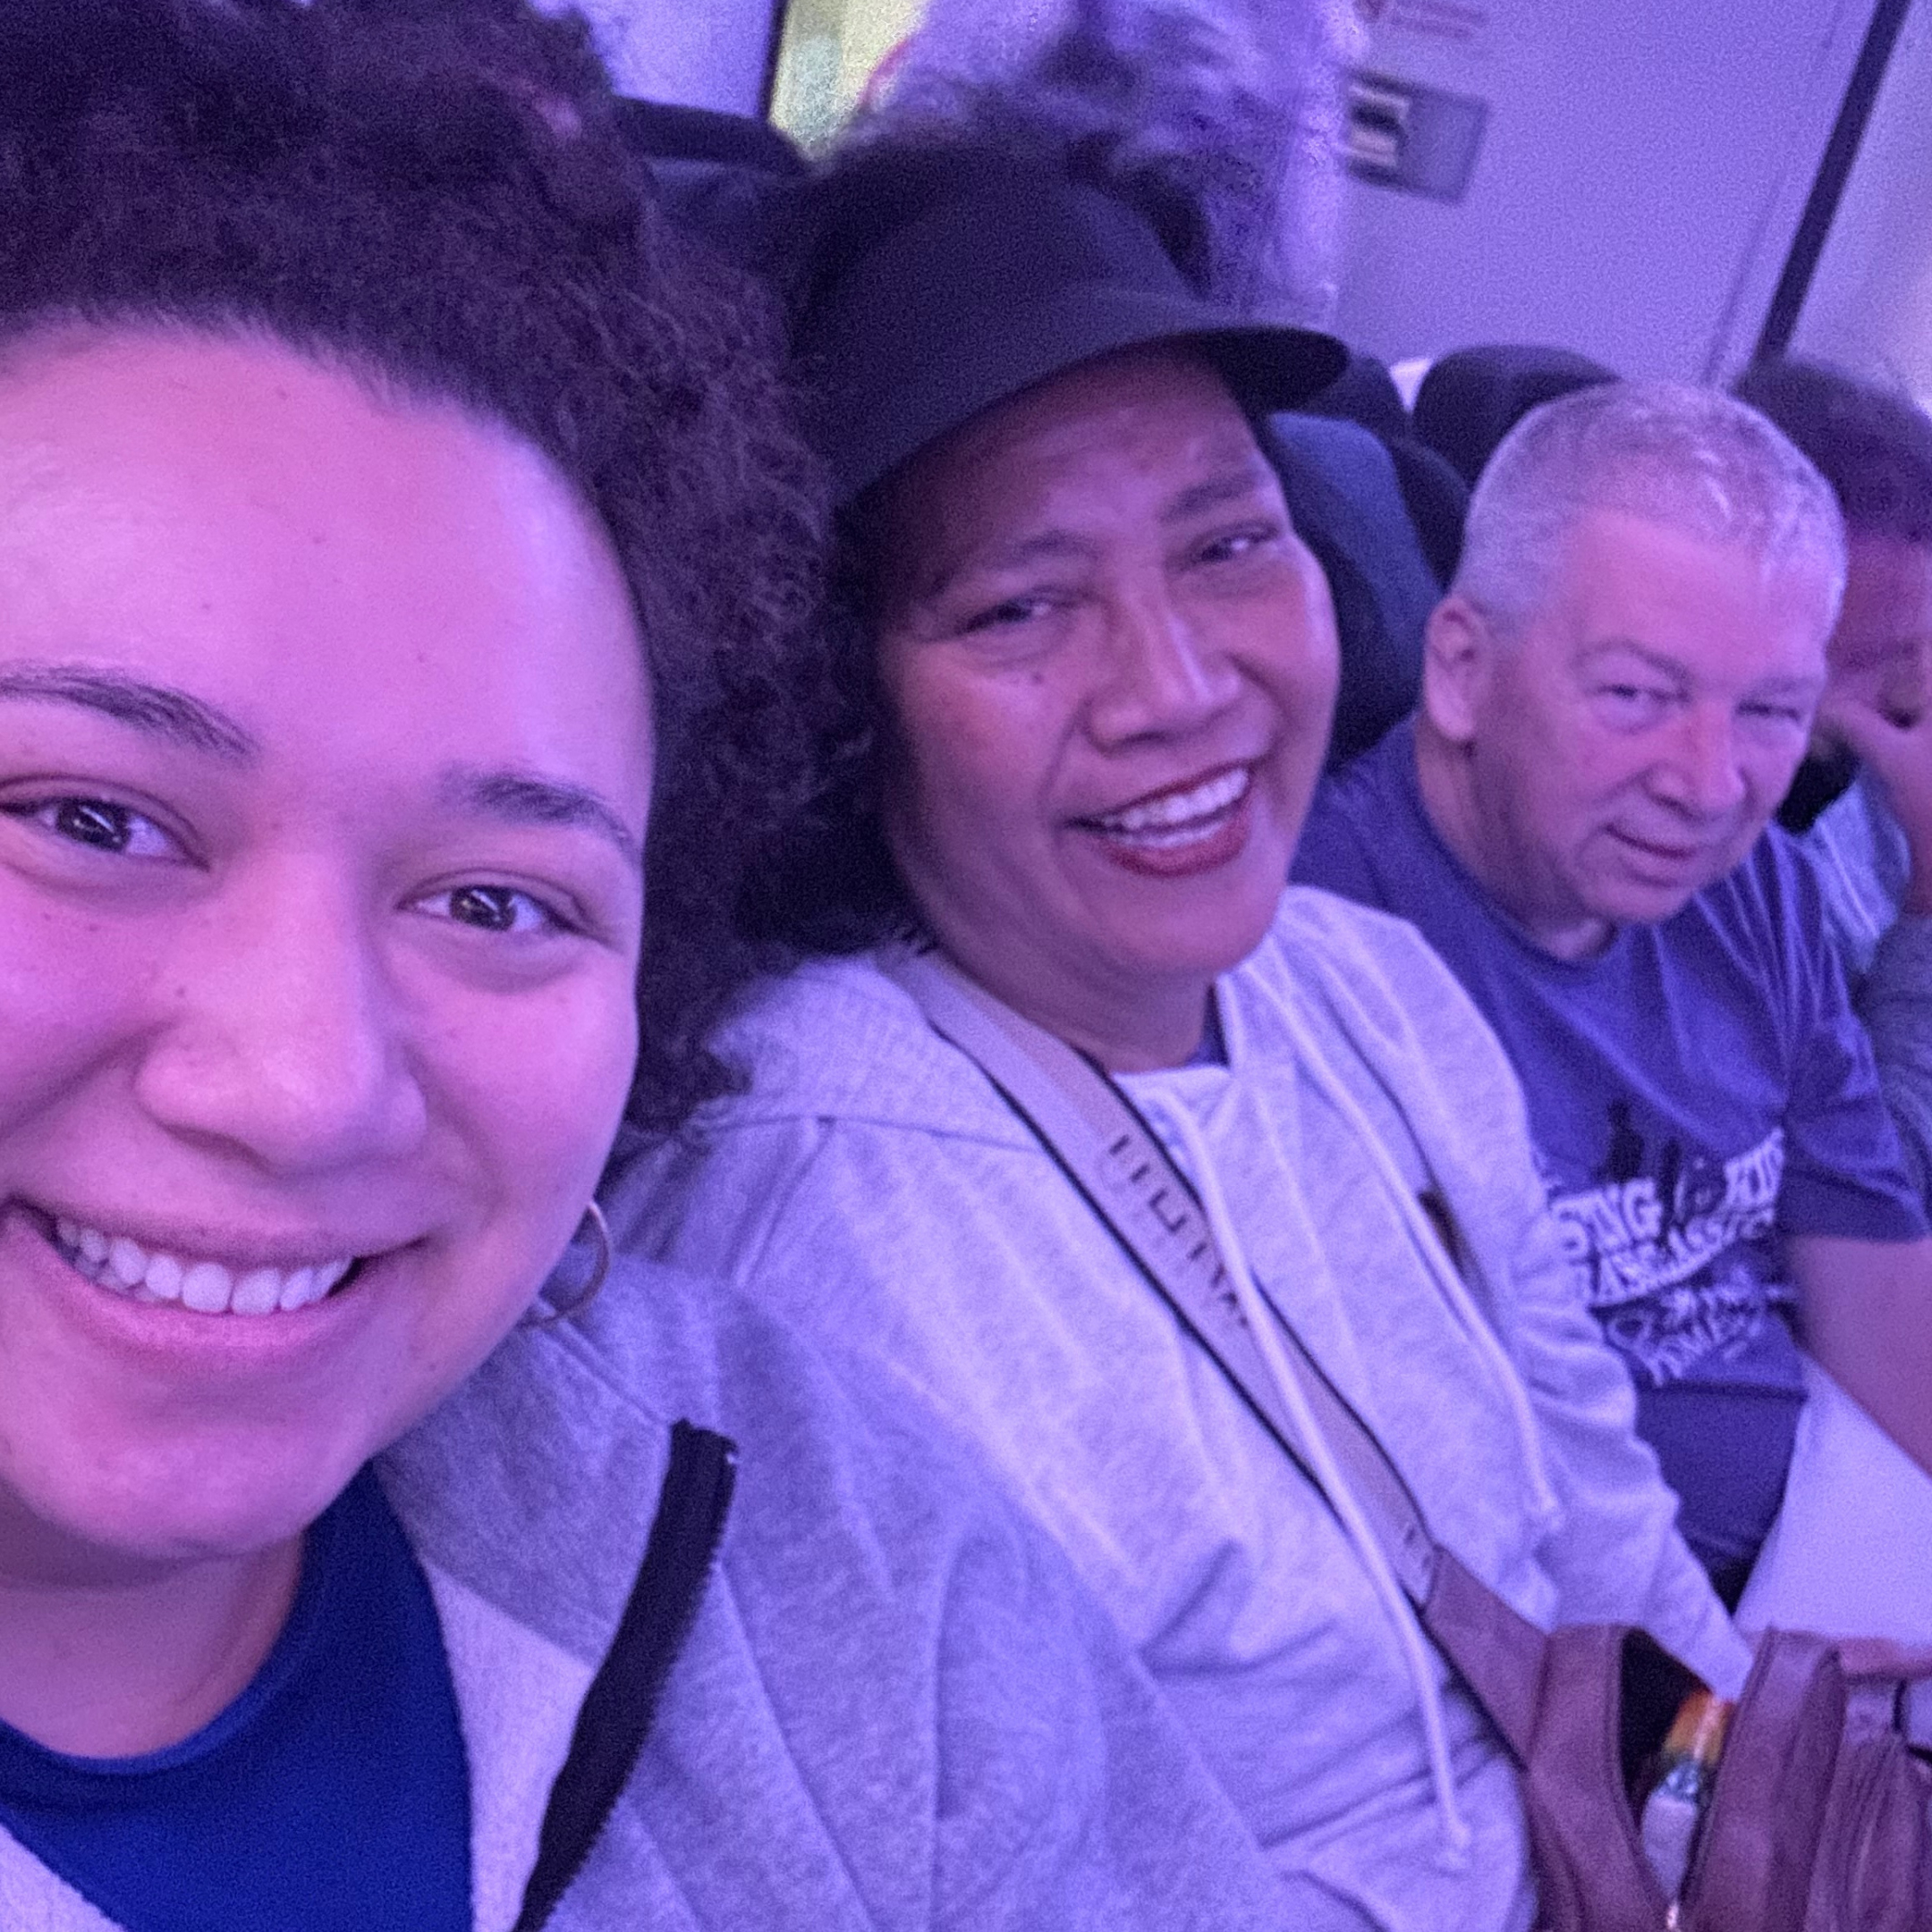 From left to right, the image shows three smiling individuals seated on an airplane: names unknown